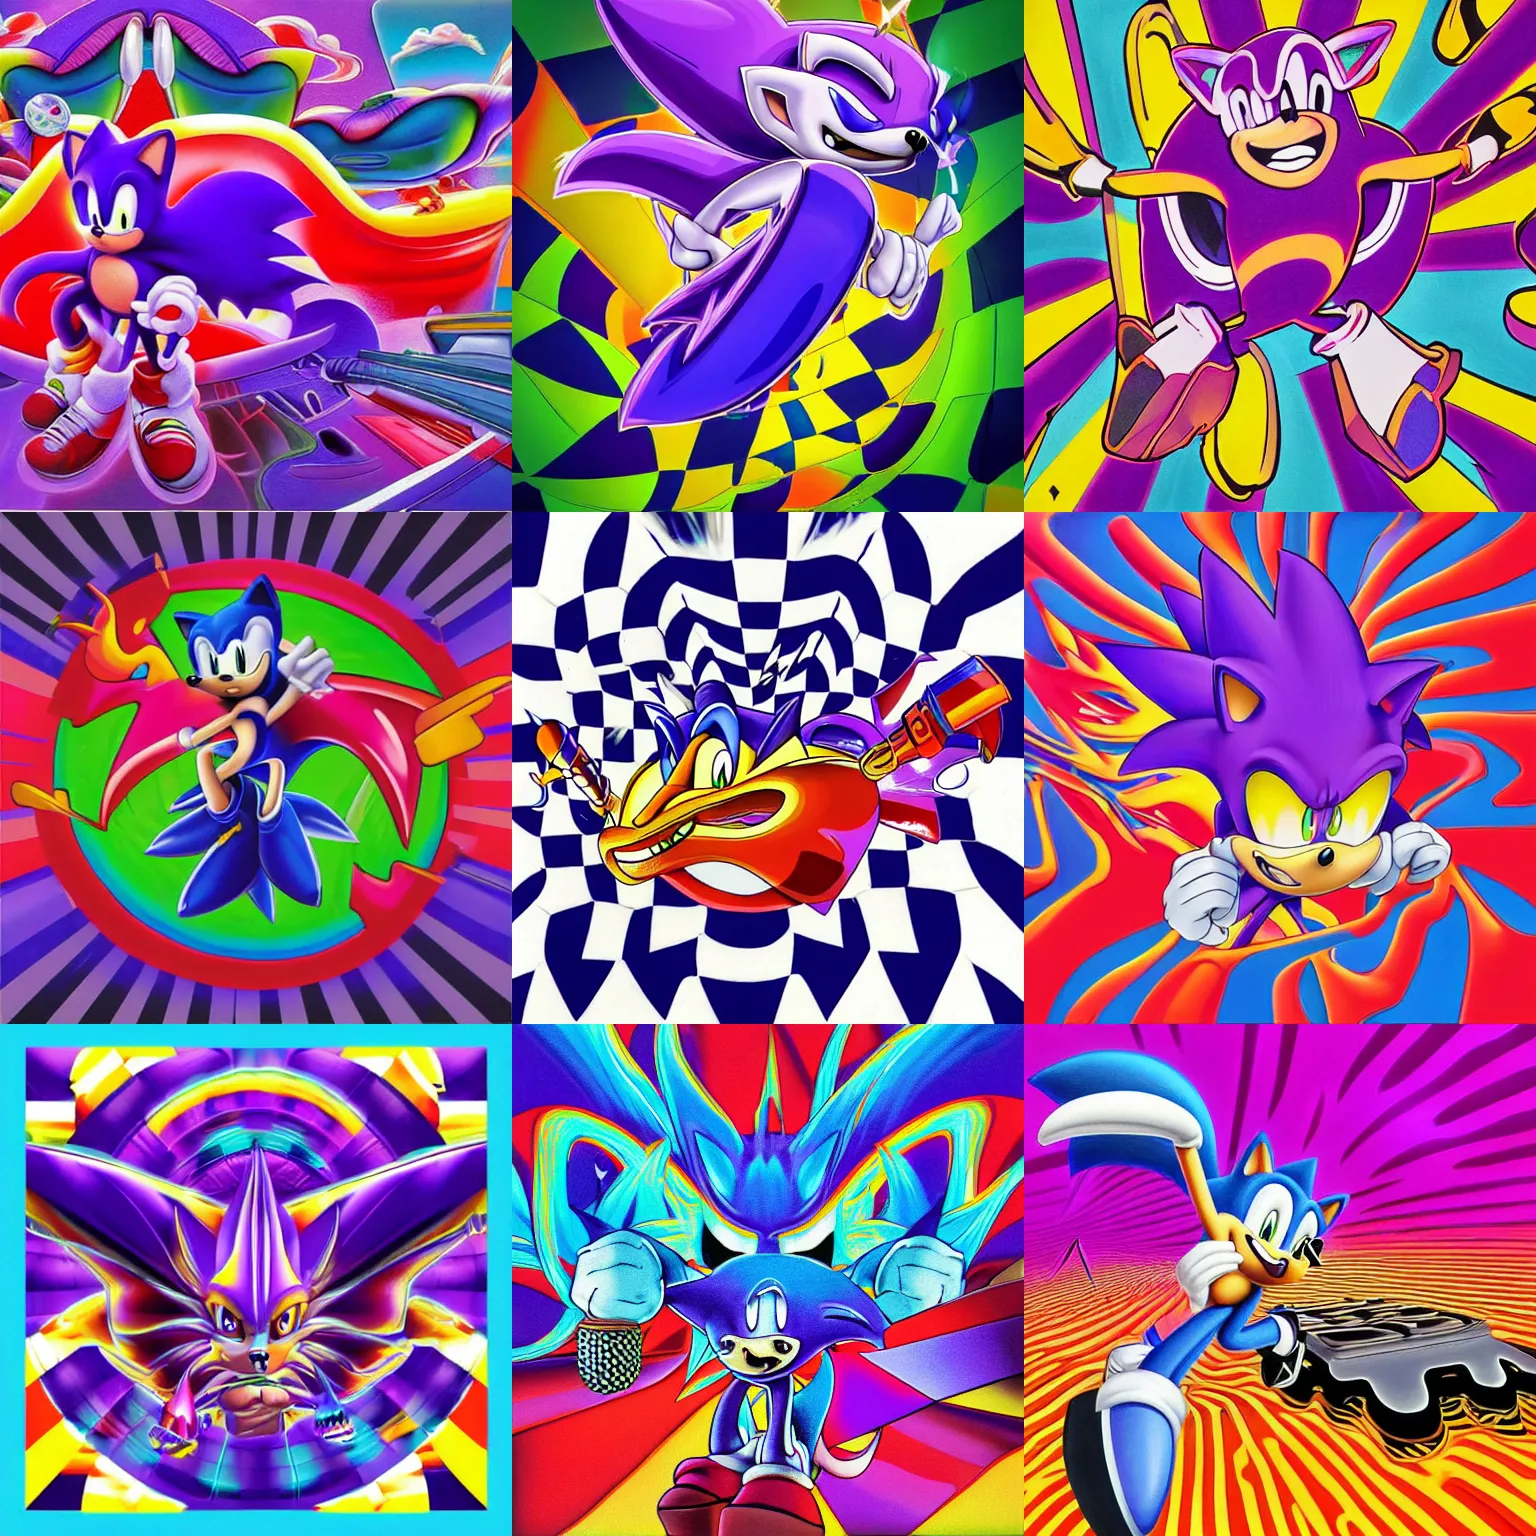 Prompt: surreal, sharp, detailed professional, high quality airbrush art MGMT album cover of a liquid dissolving LSD DMT sonic the hedgehog on a flat purple checkerboard plane, 1990s 1992 prerendered graphics raytraced phong shaded album cover